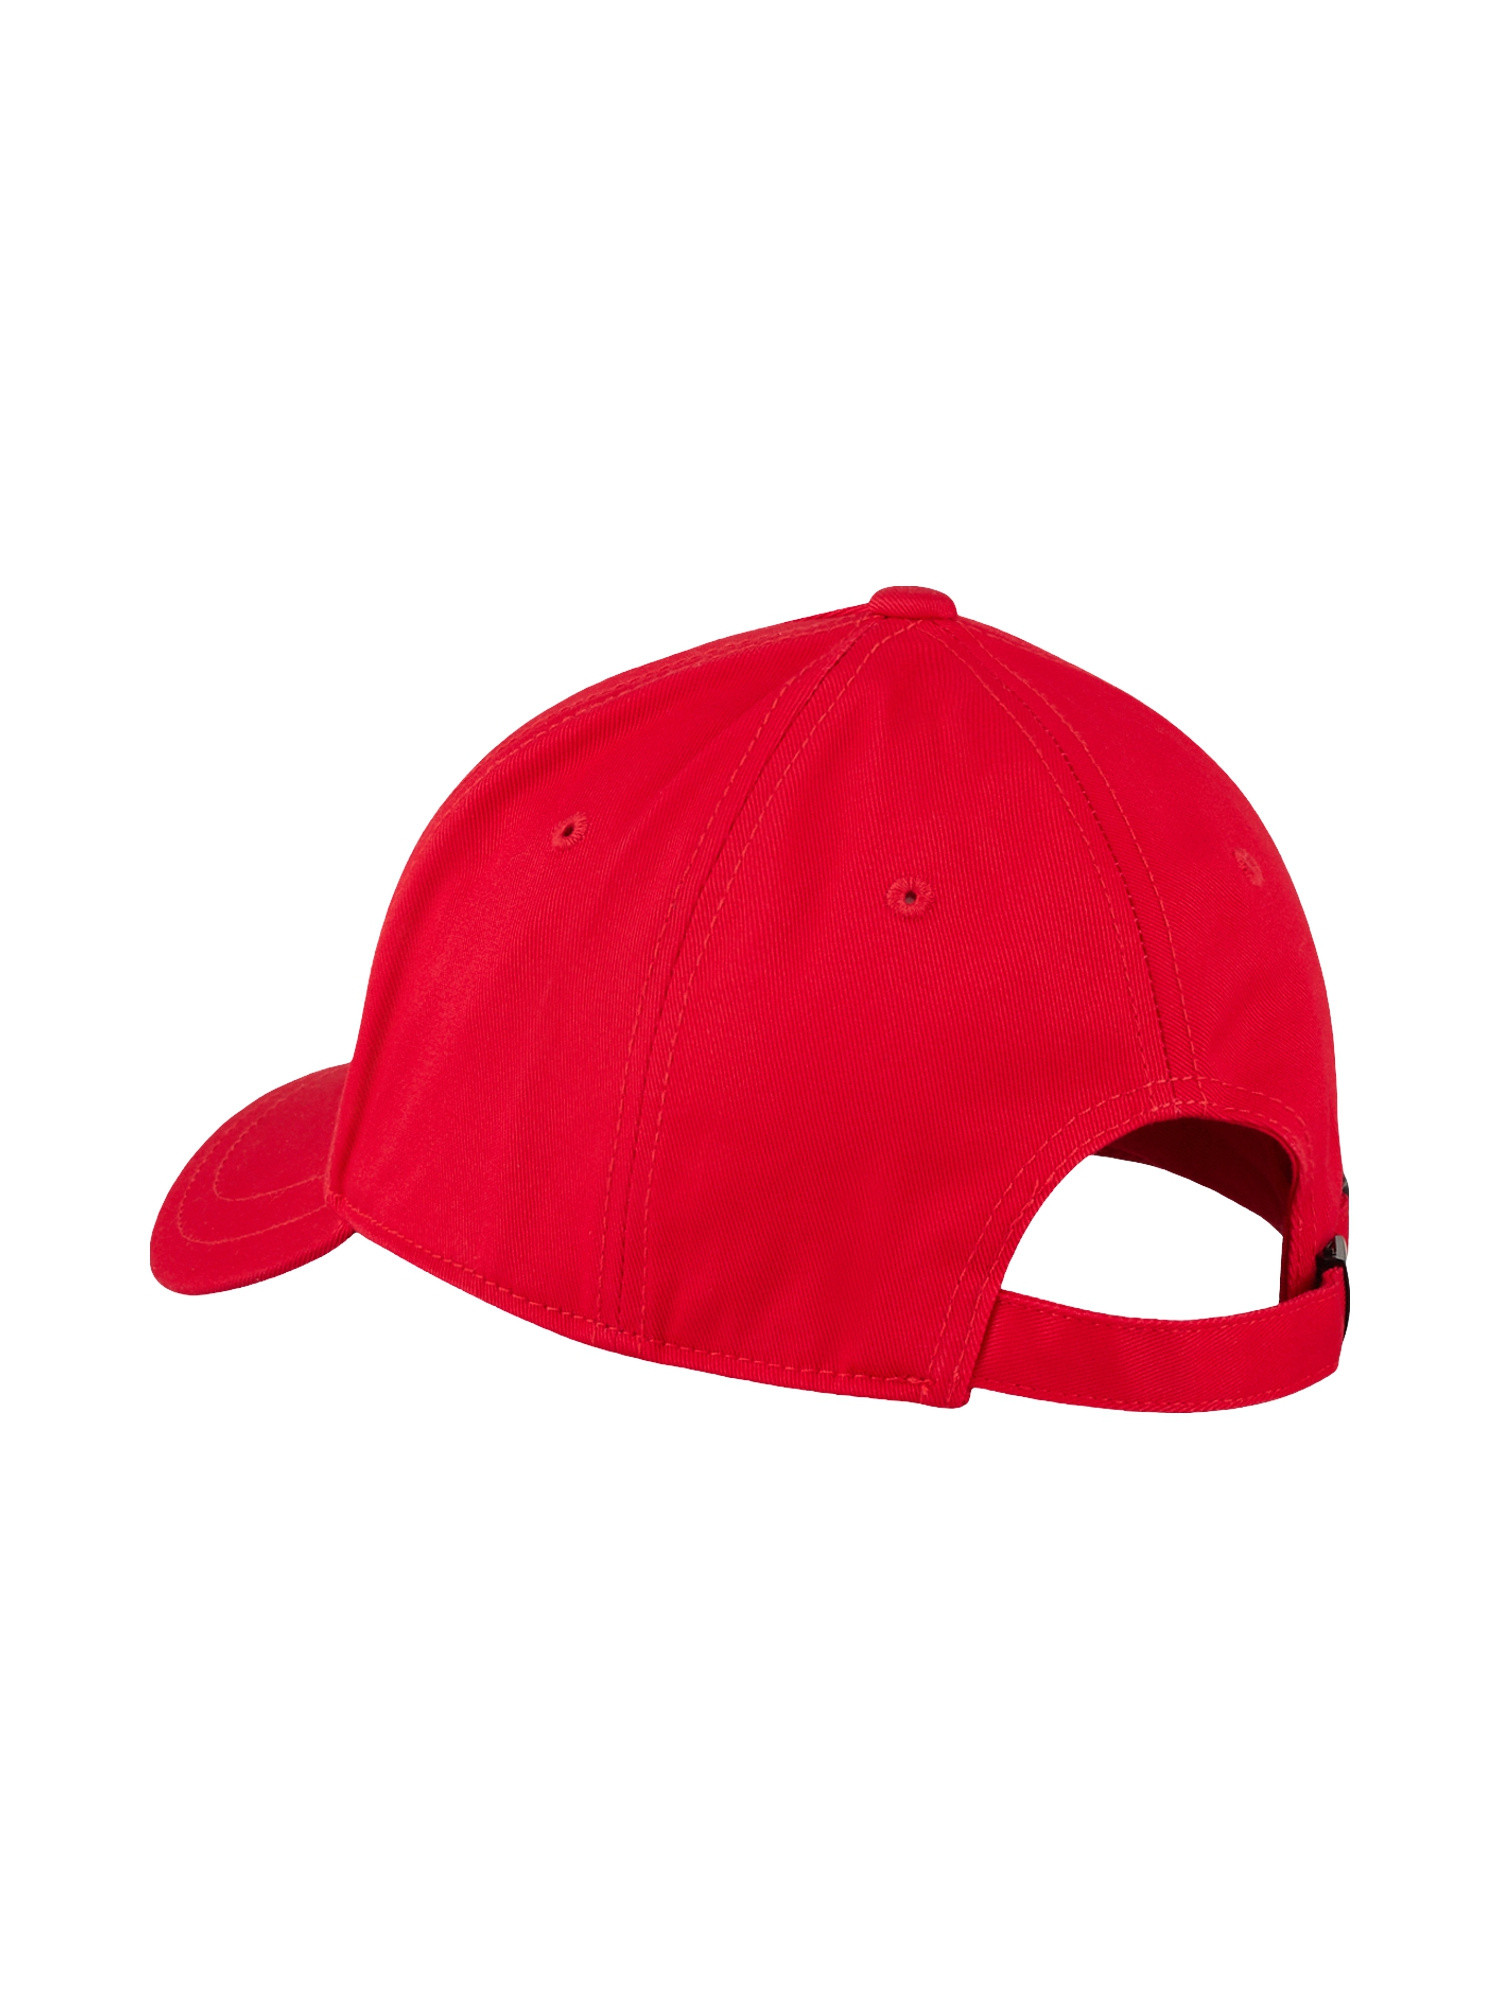 Armani Exchange - Baseball cap in cotton with print, Red, large image number 1